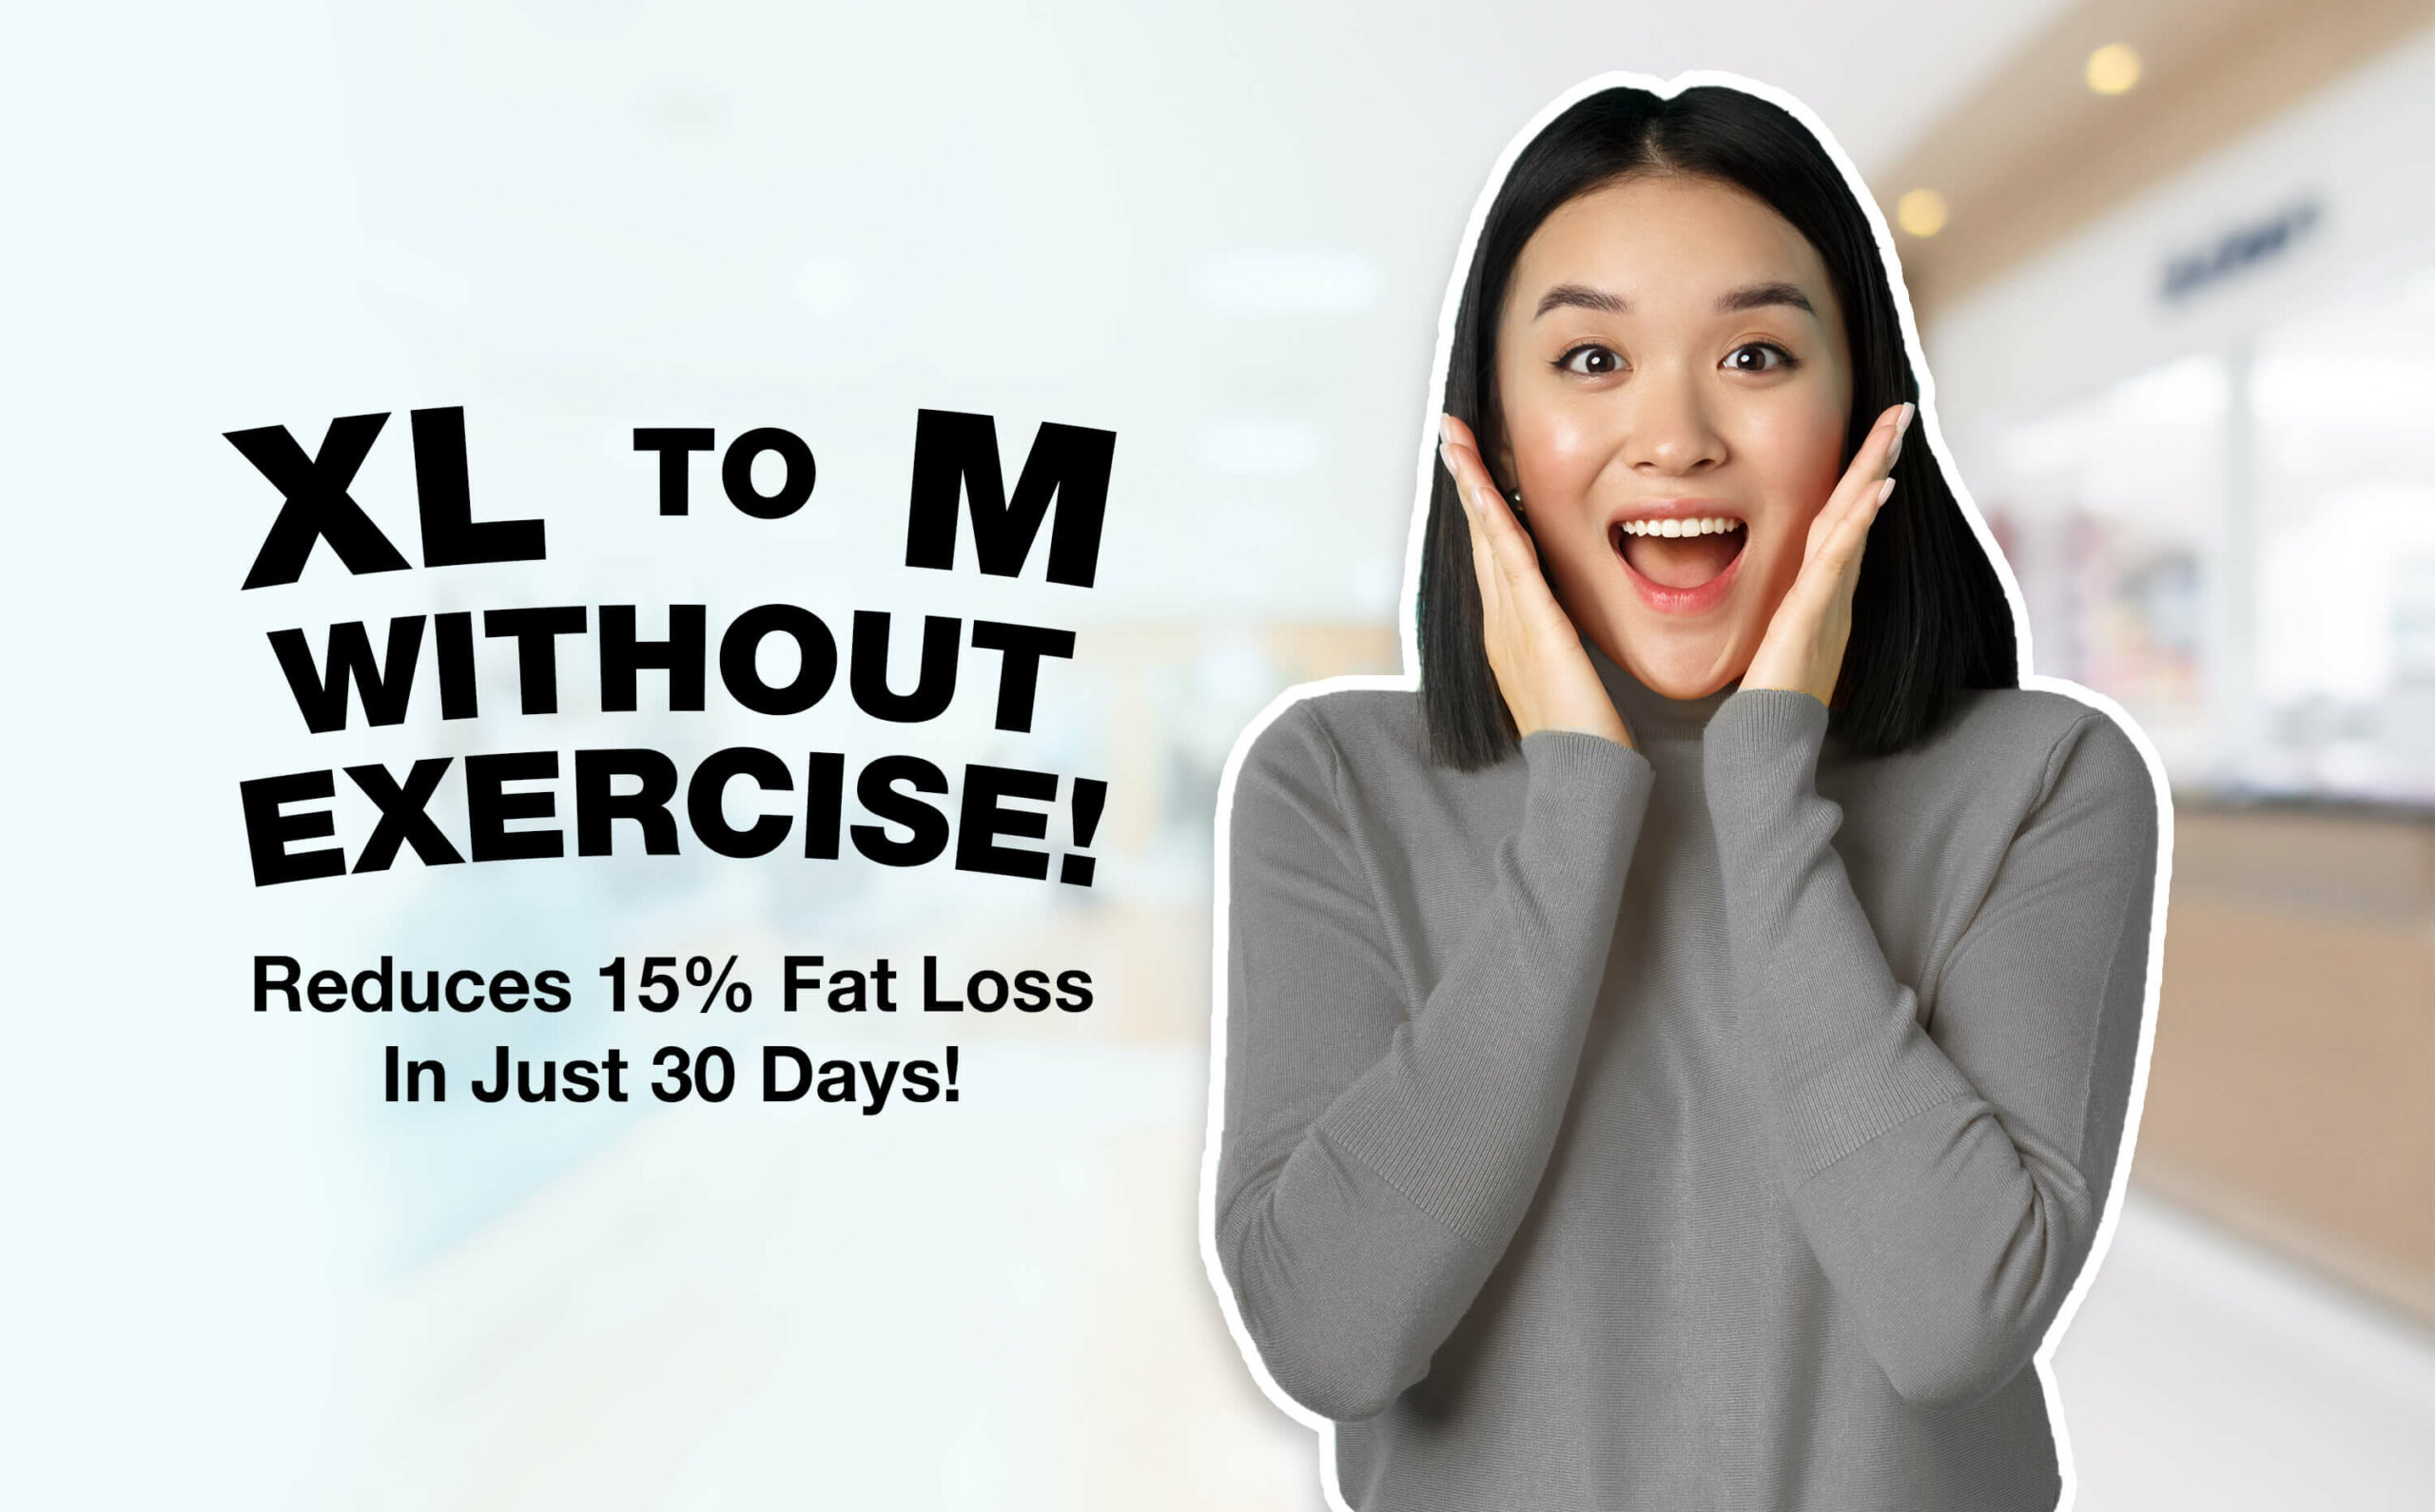 A woman appearing to be happy, the text 'XL to M without exercise! Reduce 15% fat loss in just 30 days!' is displayed.